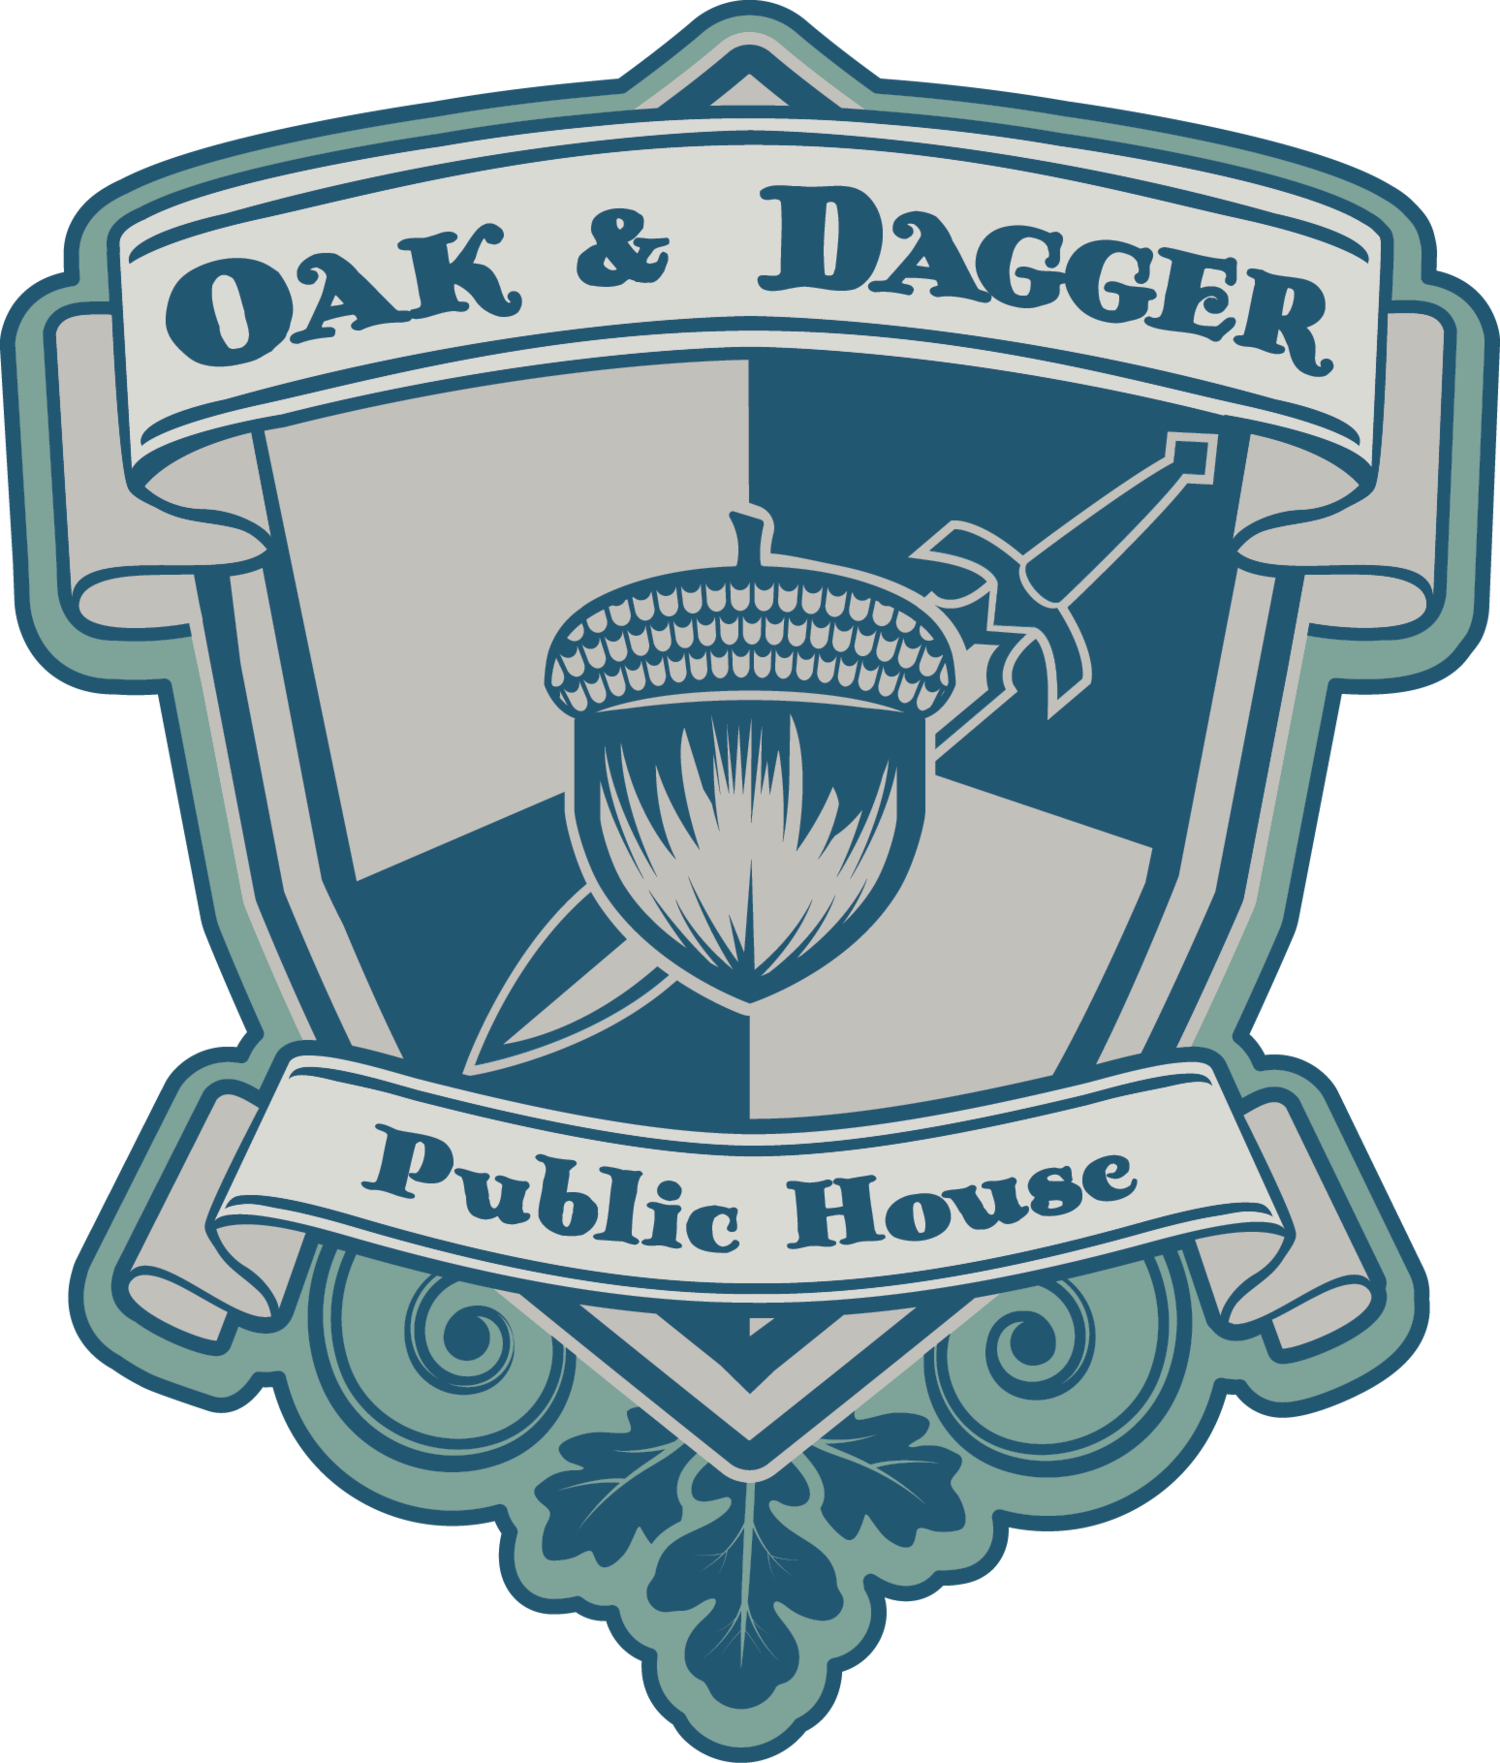 Longleaf Film Festival is proud to have products from the Oak and Dagger Public House as our featured beers on March 3, 2017